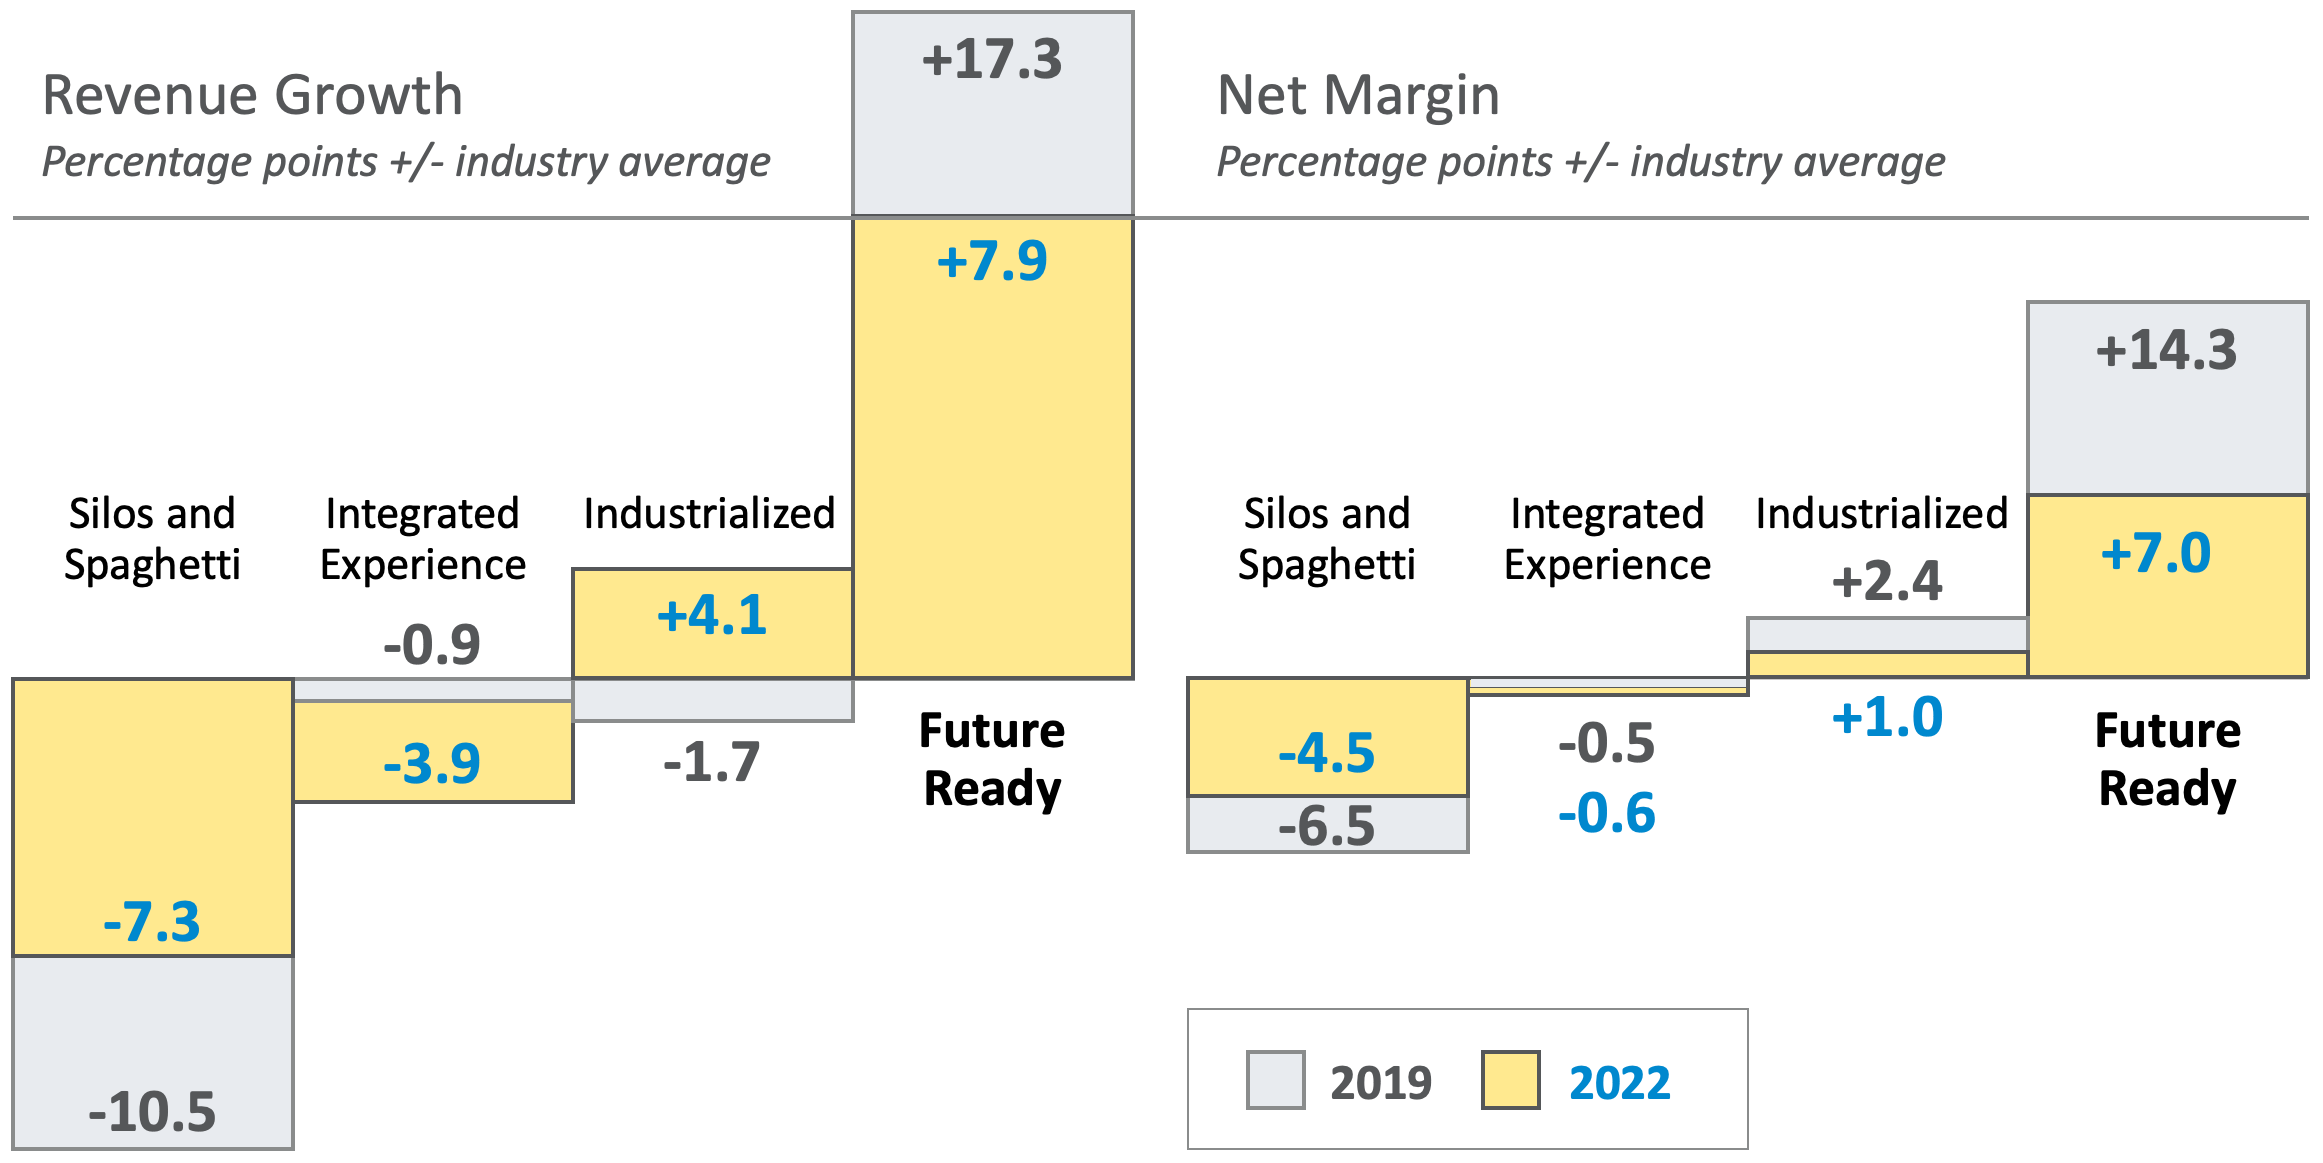 Figure 1: A comparison of revenue growth and net margins of future ready companies between 2019 and 2022